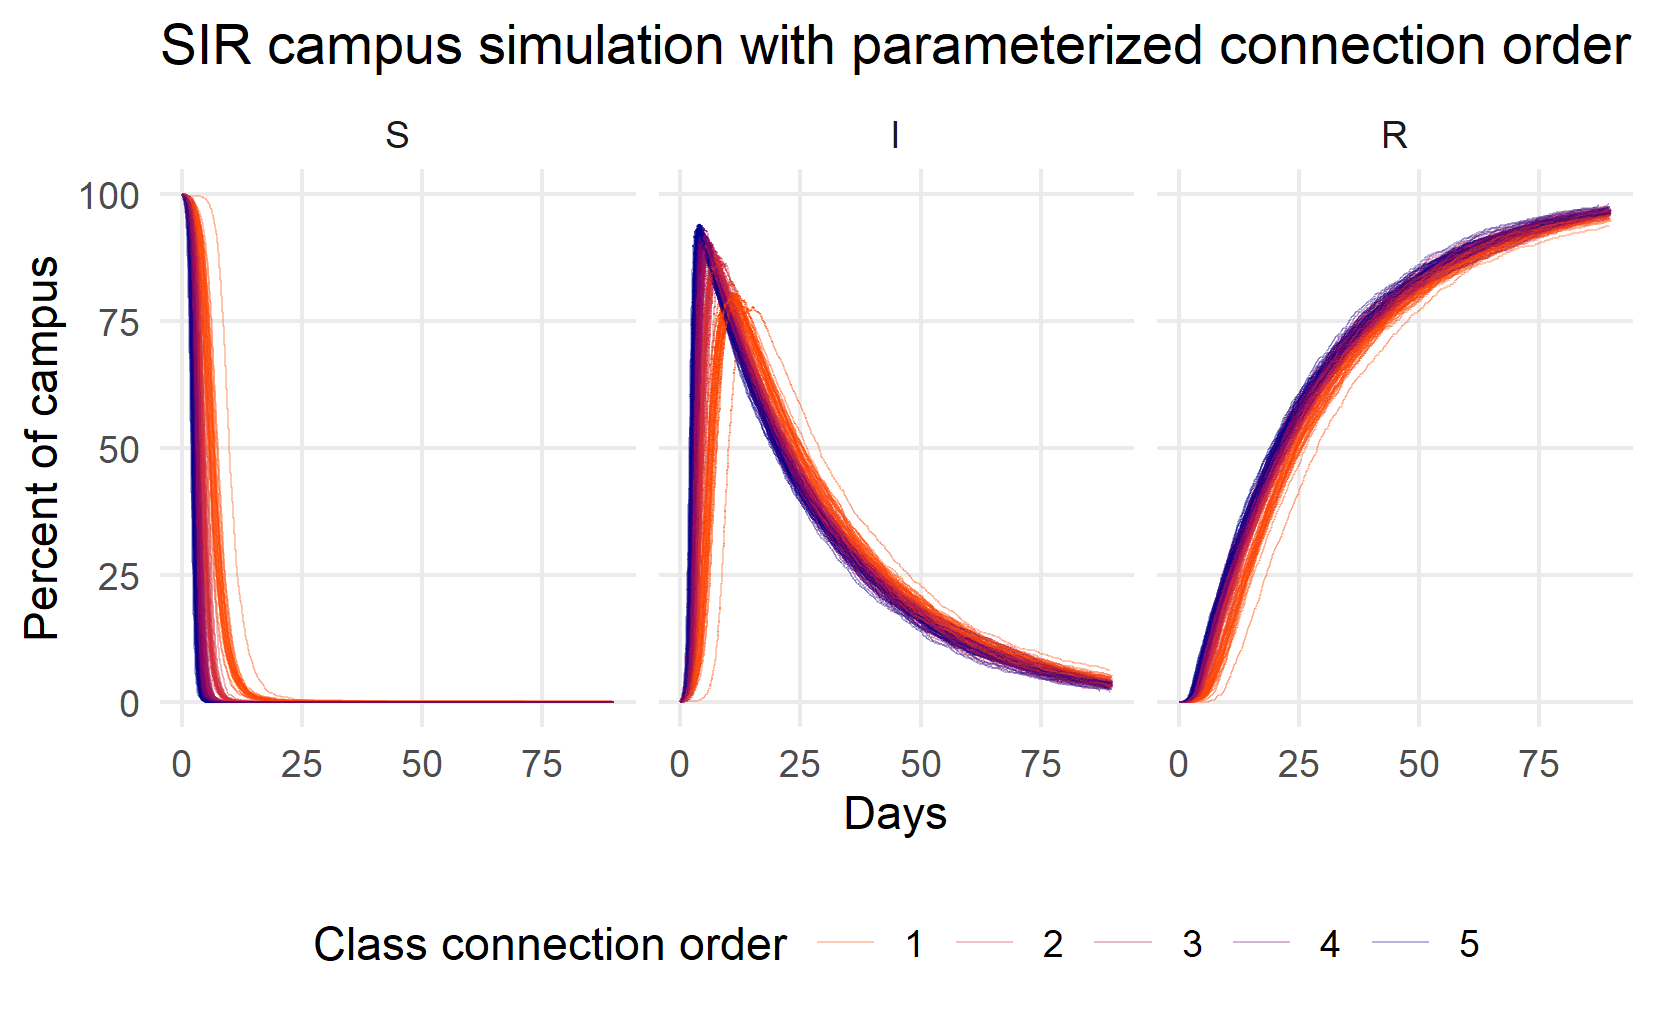 Simulating Susceptible (S), Infected (I), and Recovered (R) individuals while varying classroom connections